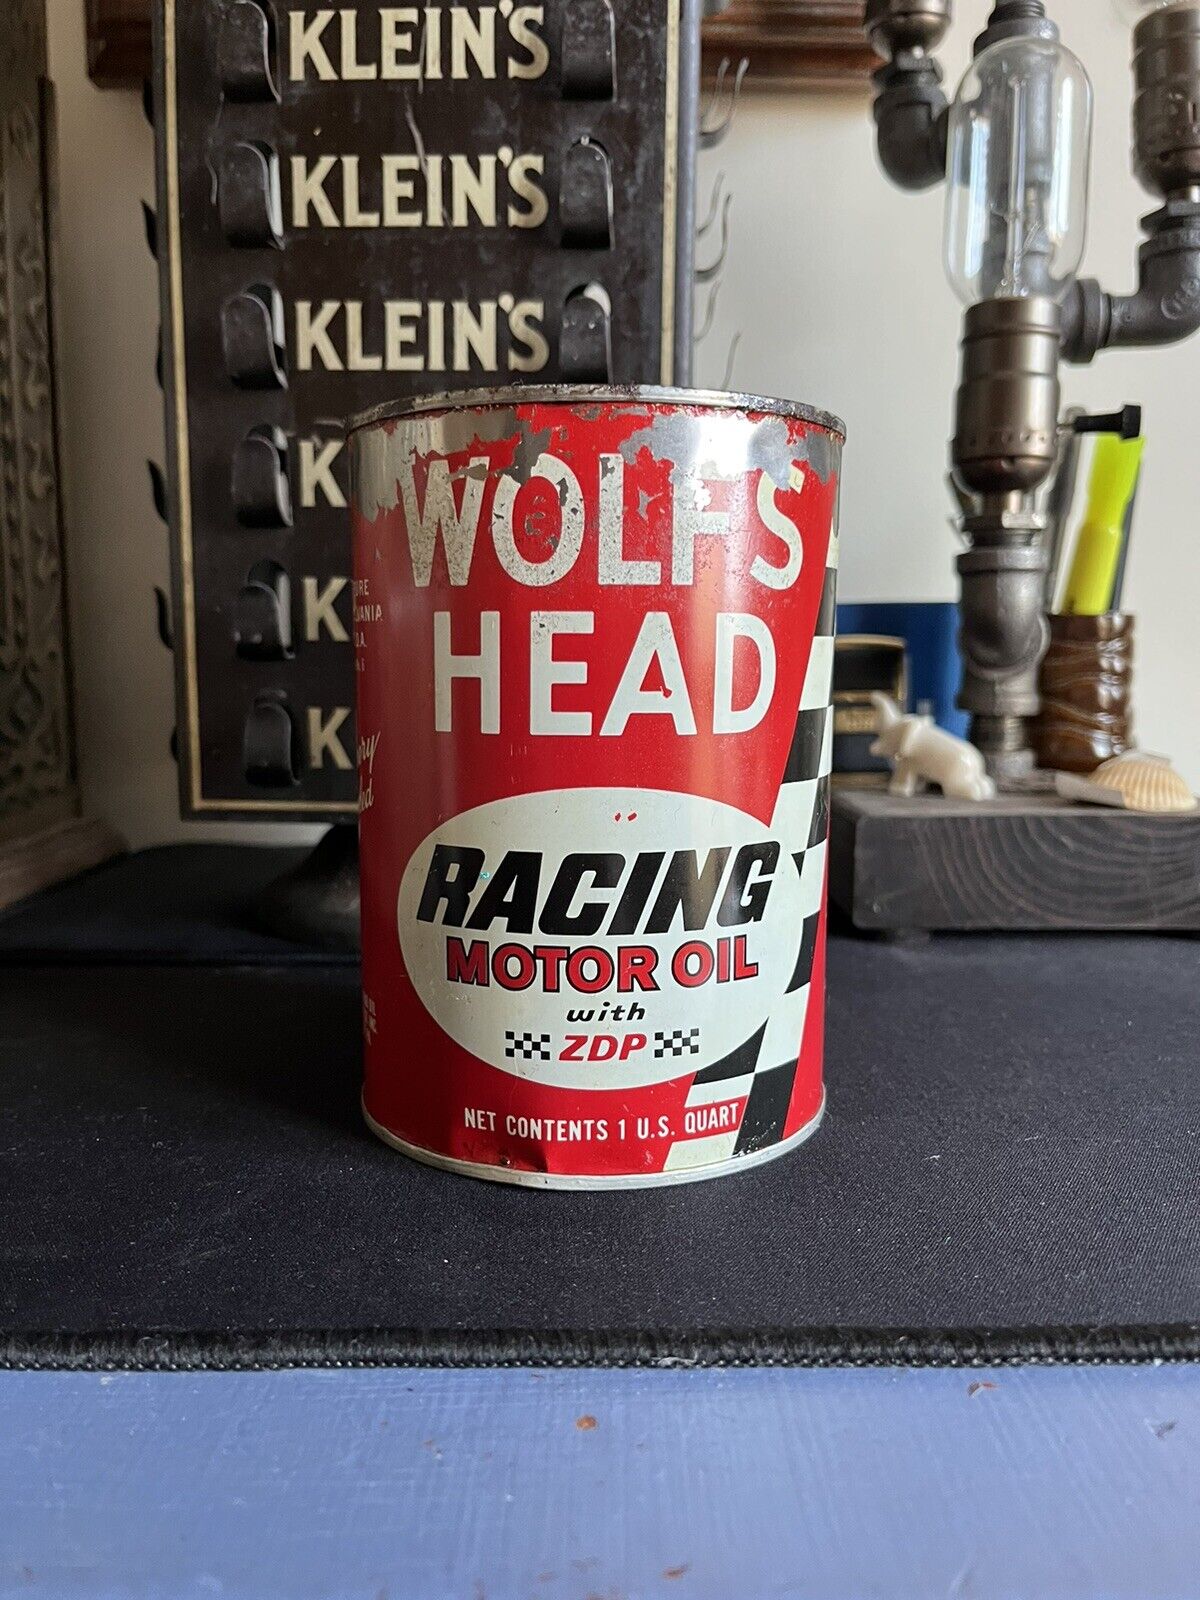 1960’s WOLF'S HEAD RACING Motor Oil Can 1 qt. - Gas & Oil -FULL-